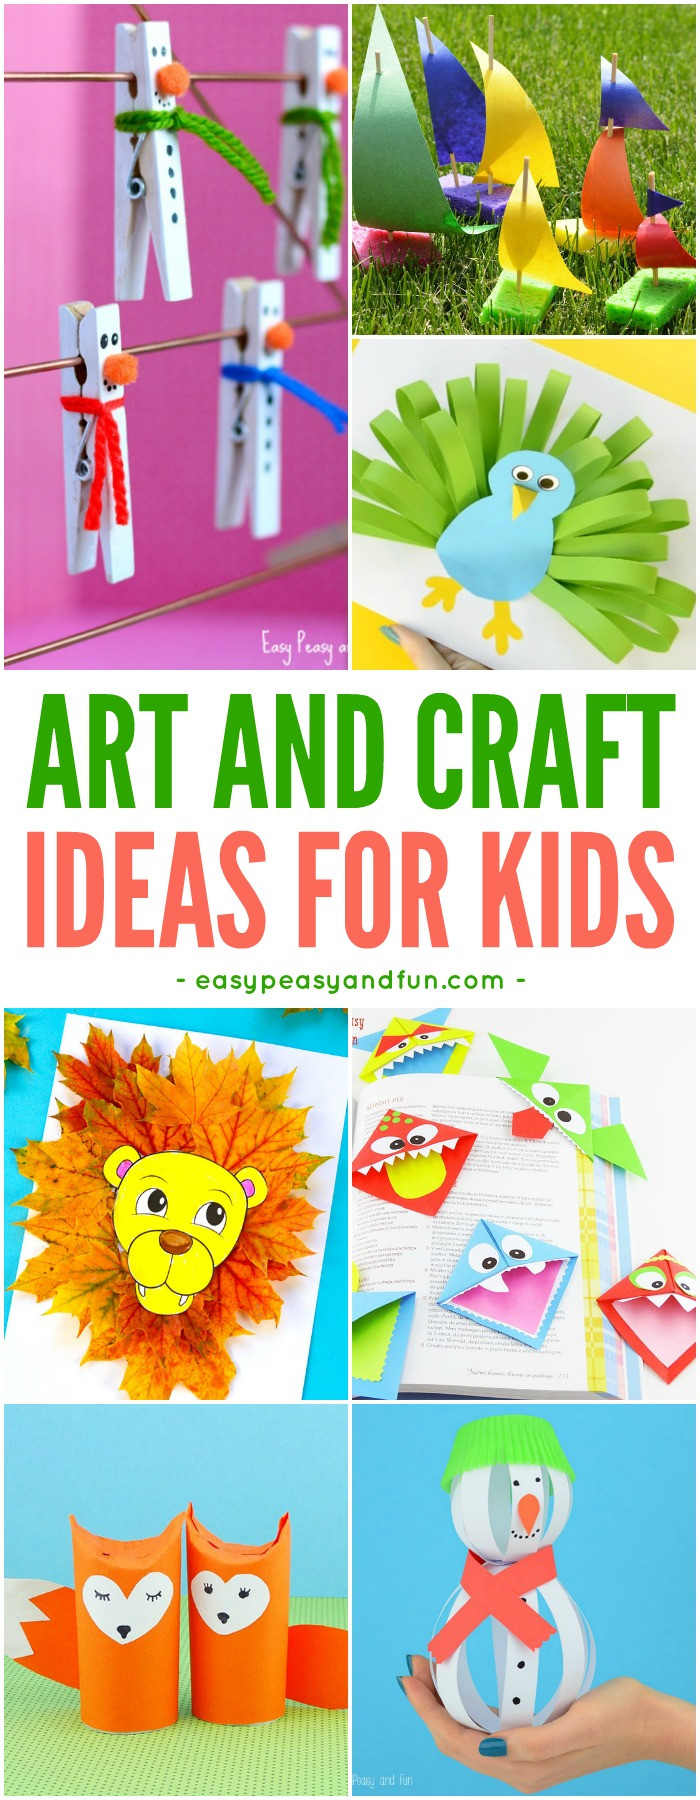 Arts And Crafts For Toddlers At Home
 Art And Craft Ideas For Kids To Do At Home